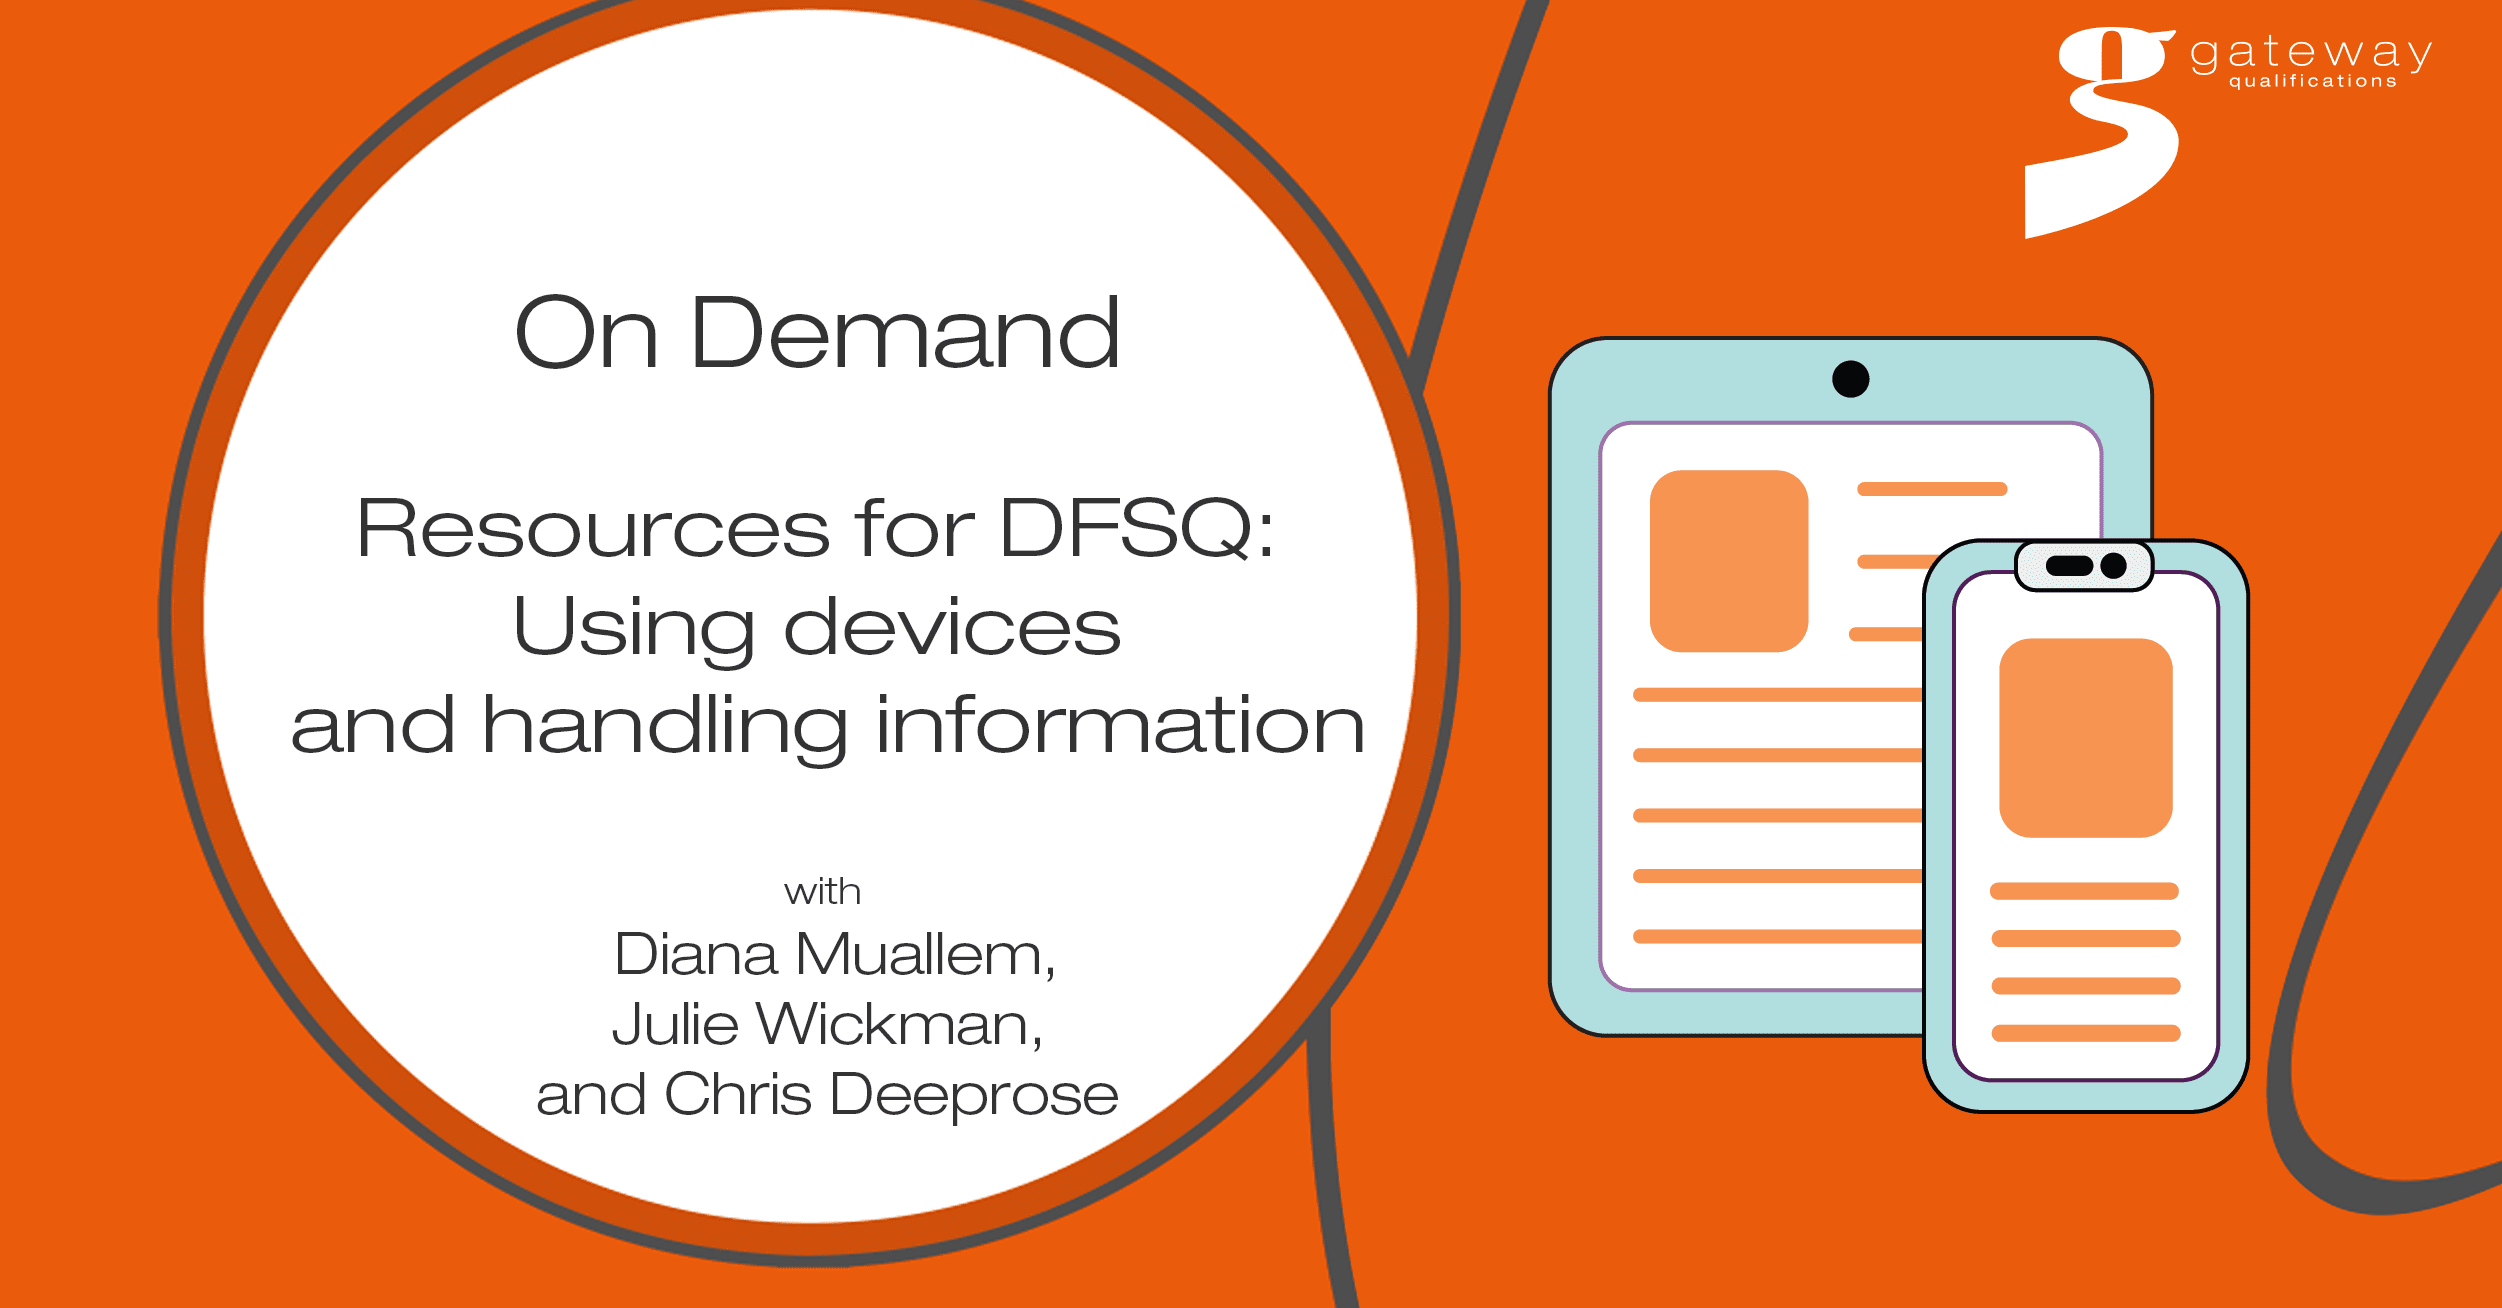 Resources for DFSQ - Using devices and handling information_on demand